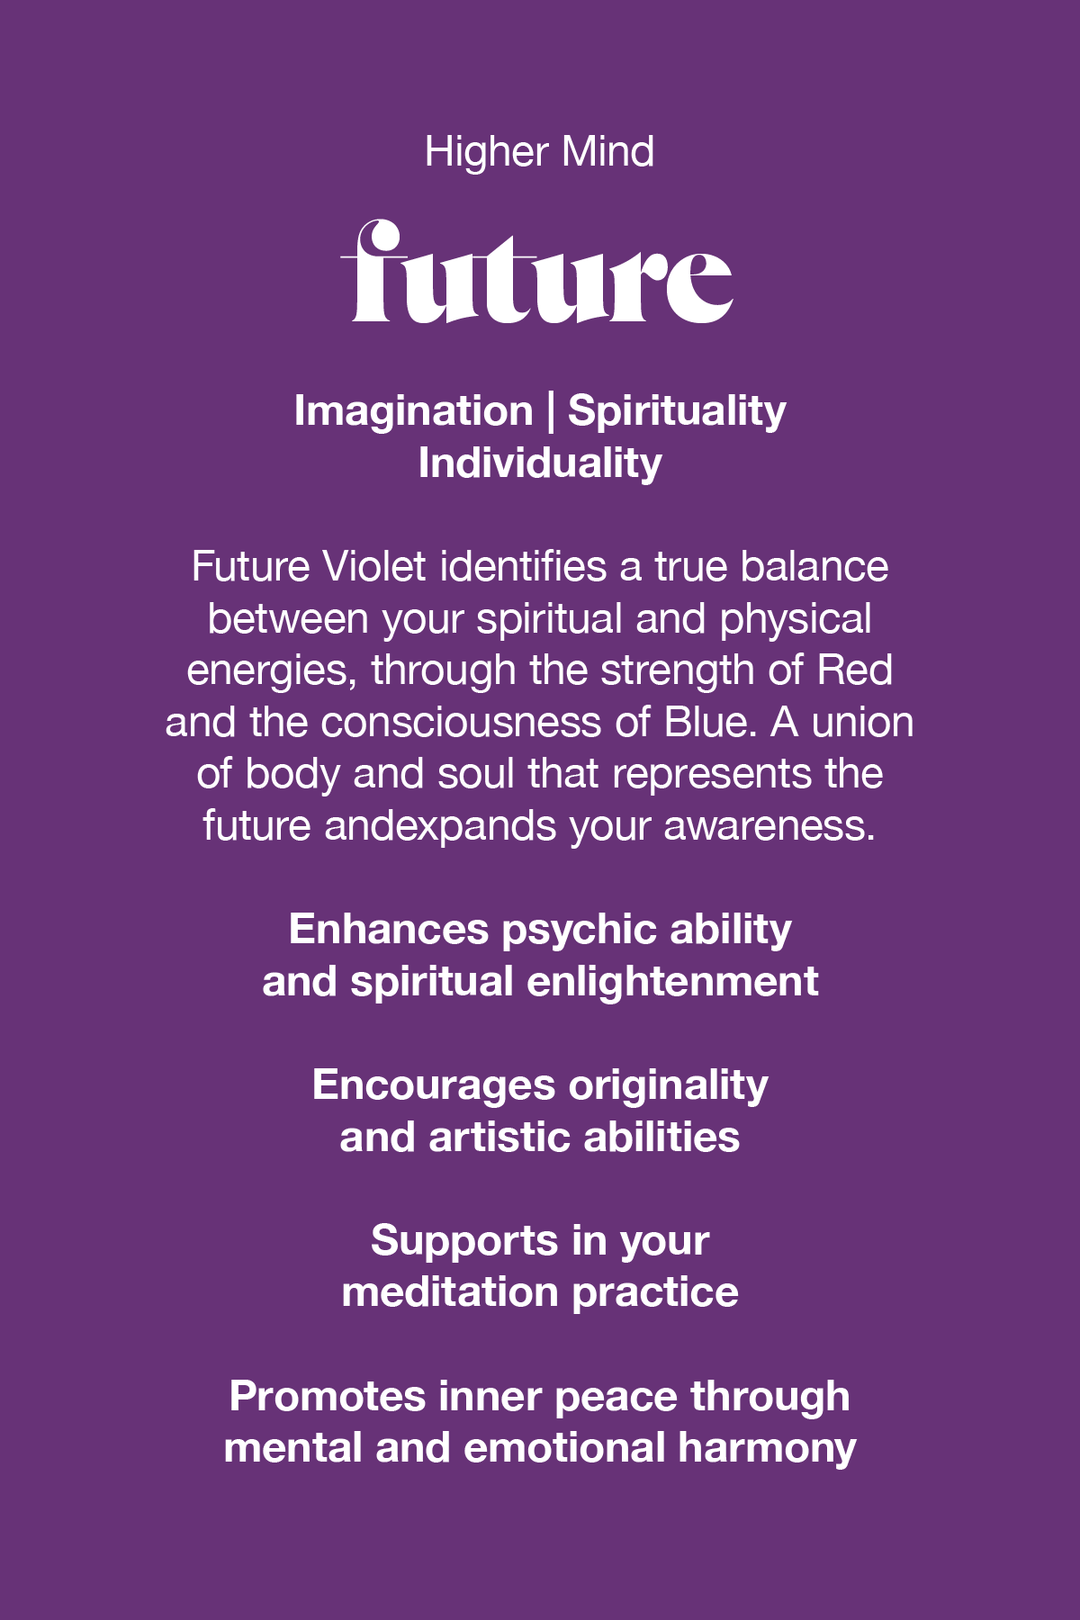 Future Violet identifies a true balance between your spiritual and physical energies, through the strength of red and the consciousness of blue. A union of body and soul that represents the future and expands your awareness. 